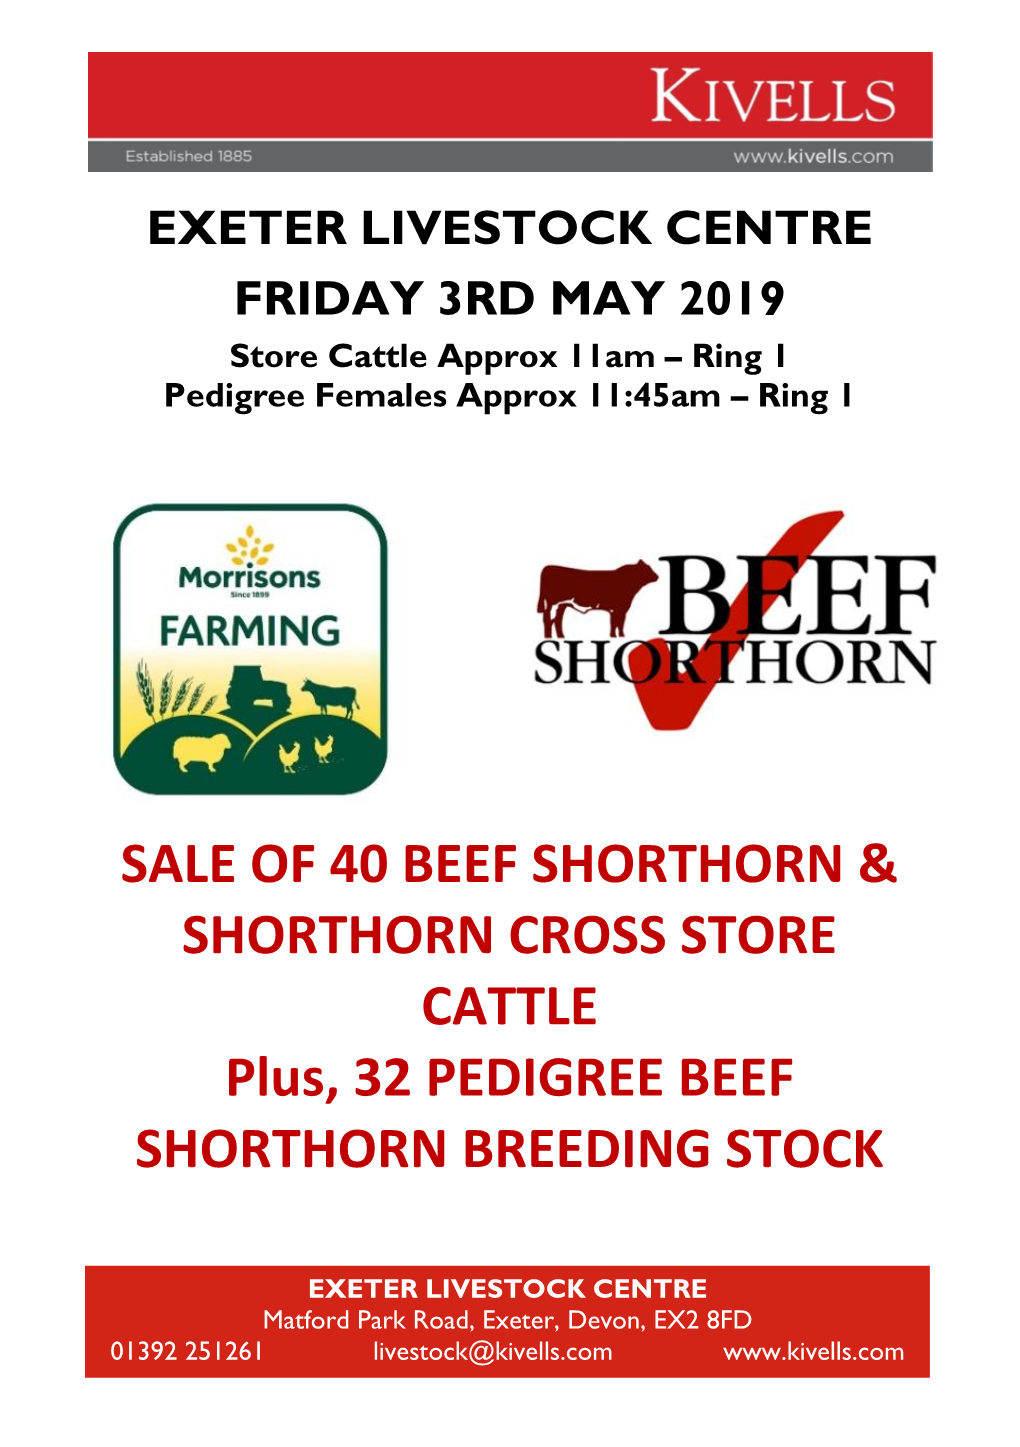 Sale of 40 Beef Shorthorn & Shorthorn Cross Store